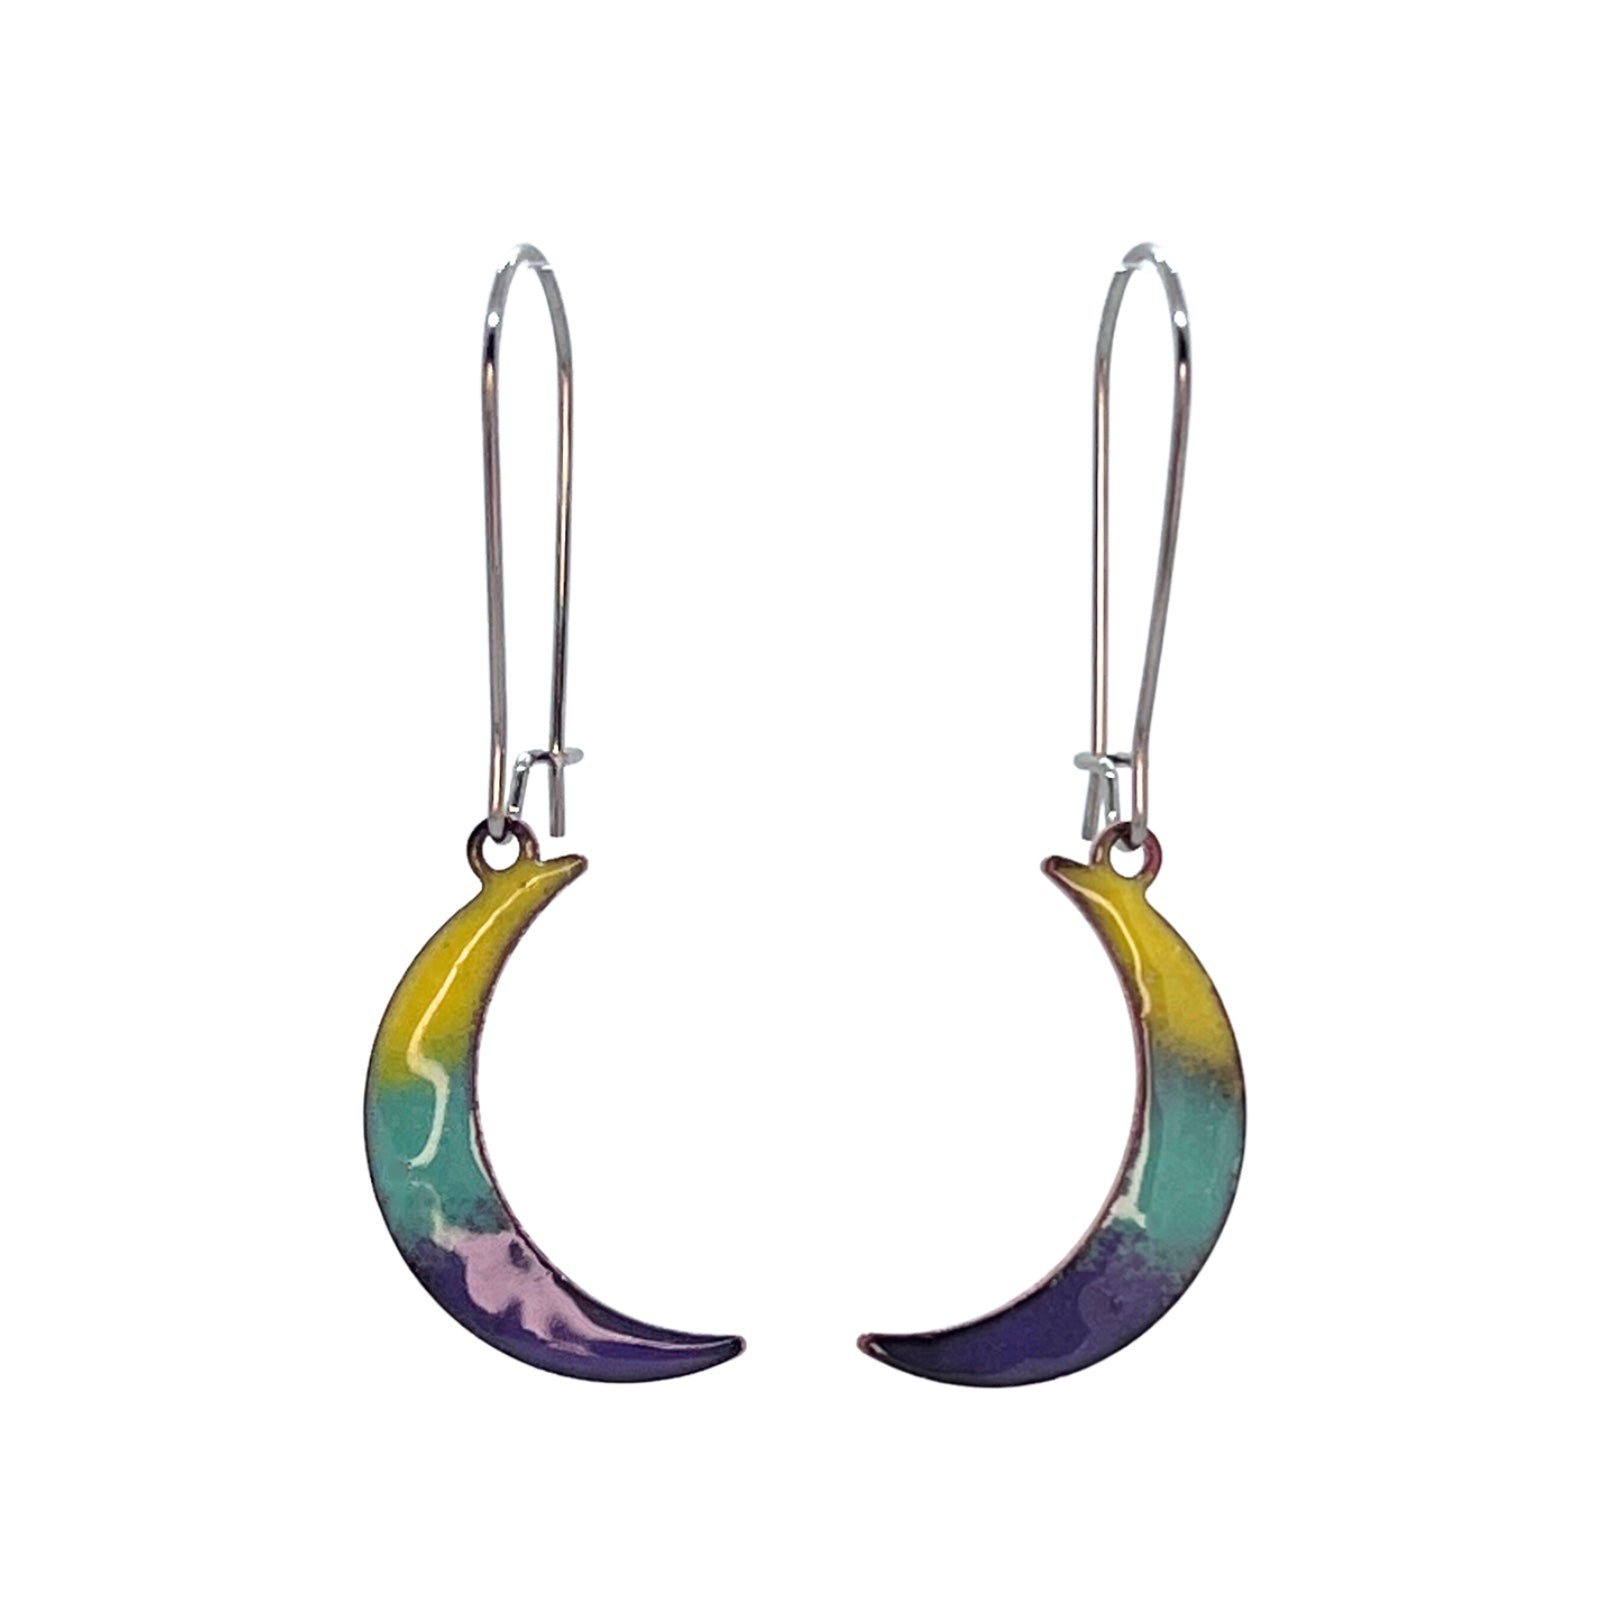 Purchase Wholesale moon earrings Free Returns  Net 60 Terms on Fairecom